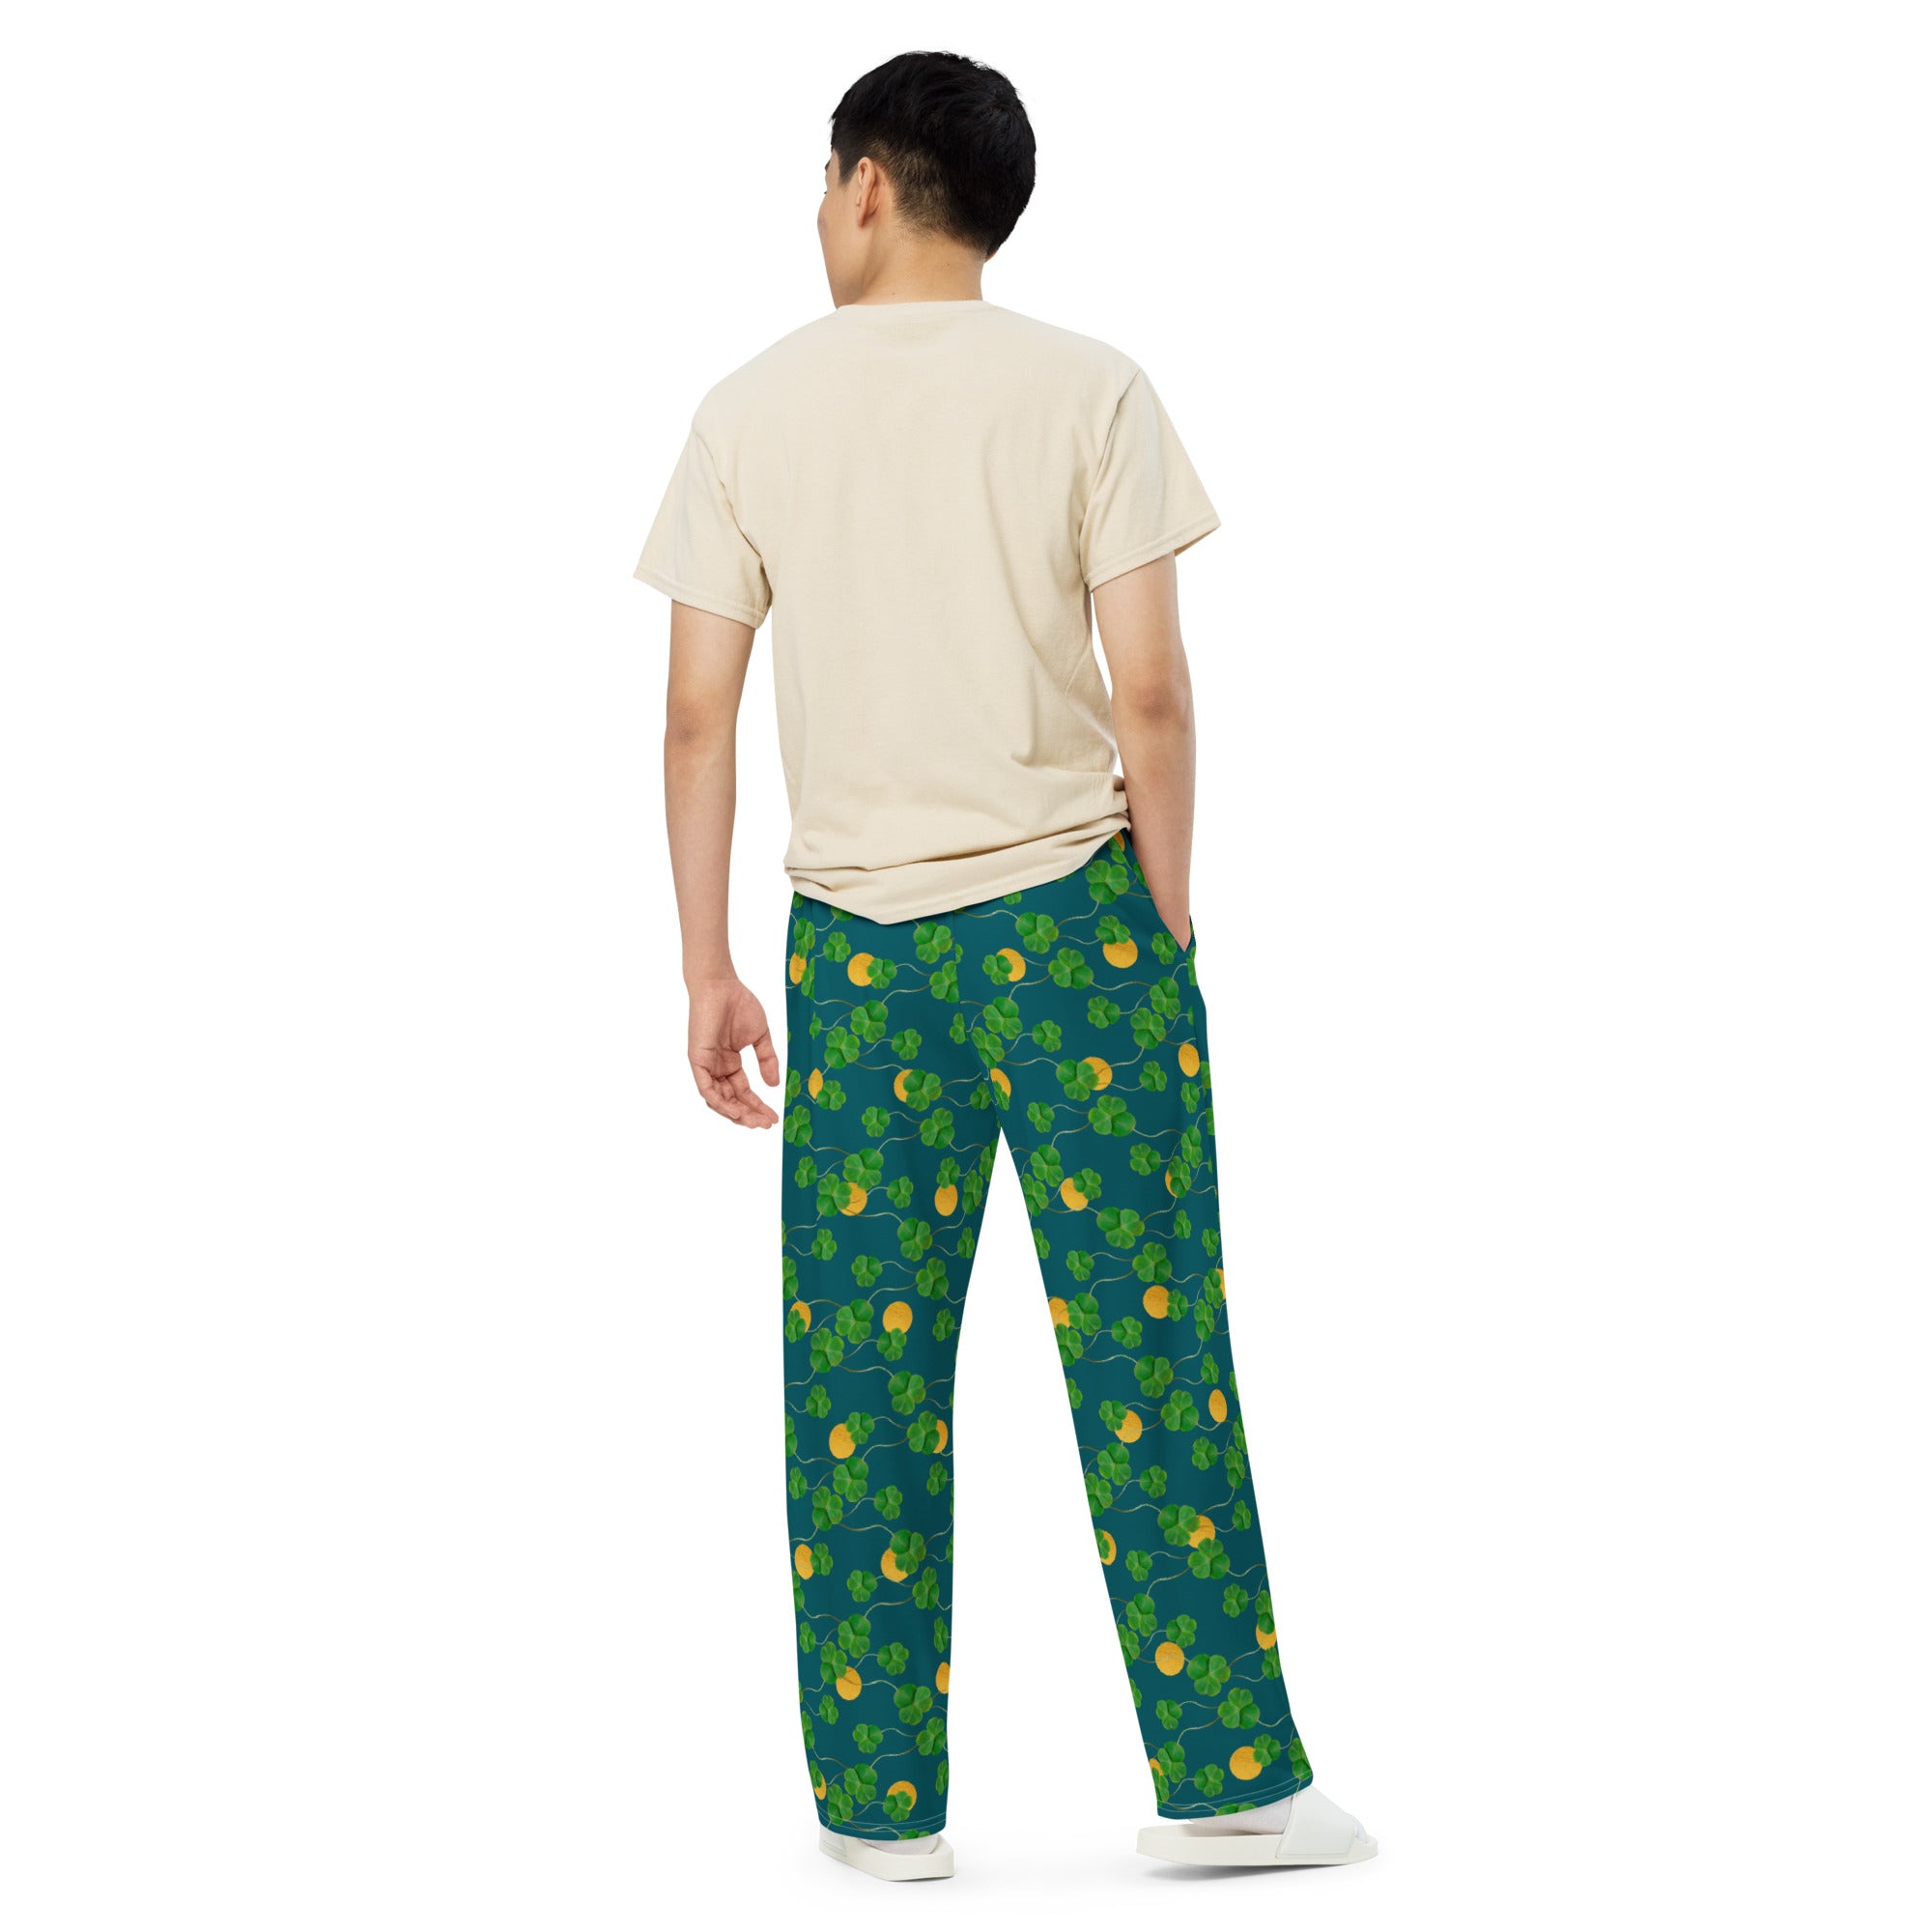 Golden State Warriors Mens Royal Sweep Pajama Pants by Concepts Sports